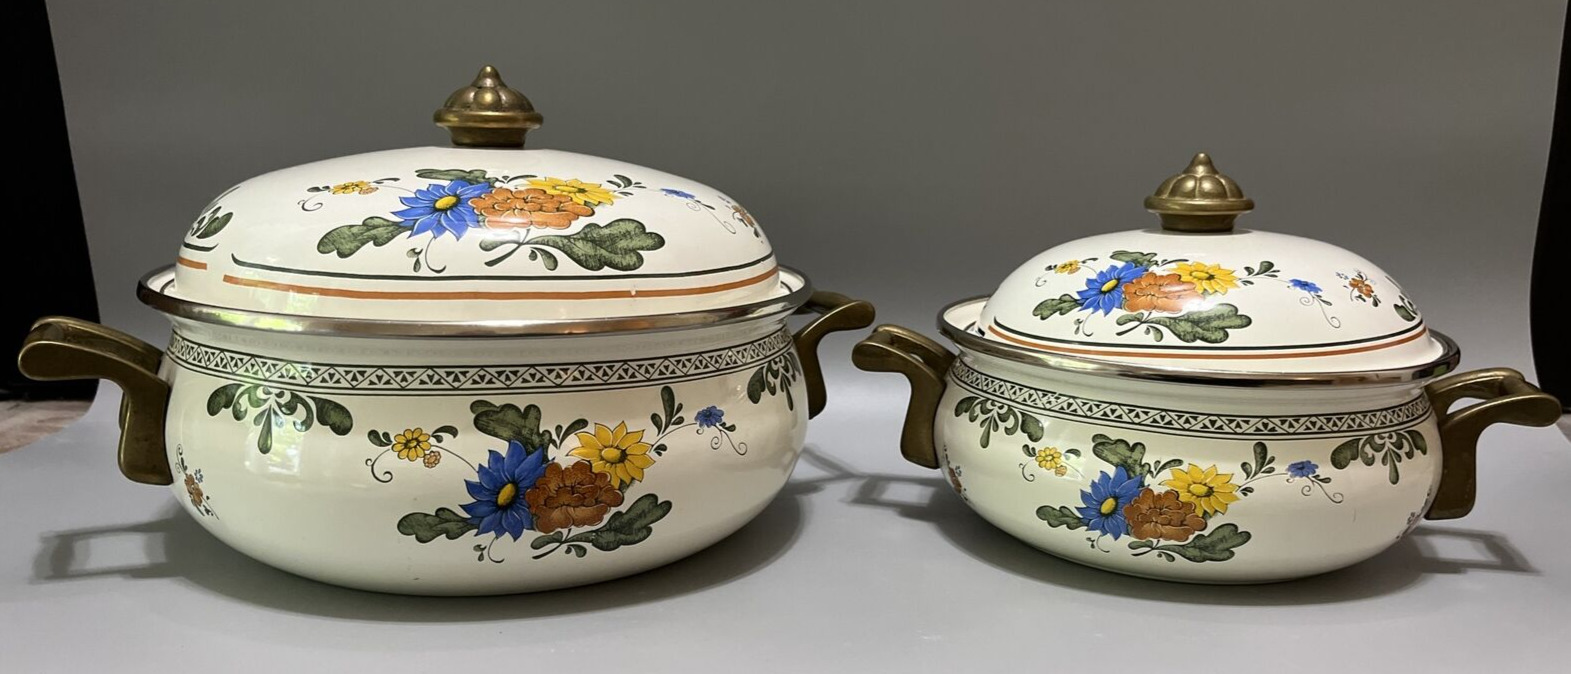 Set of 2 Enamelware Brass Handled Floral Covered Dutch Ovens Pots with Lids